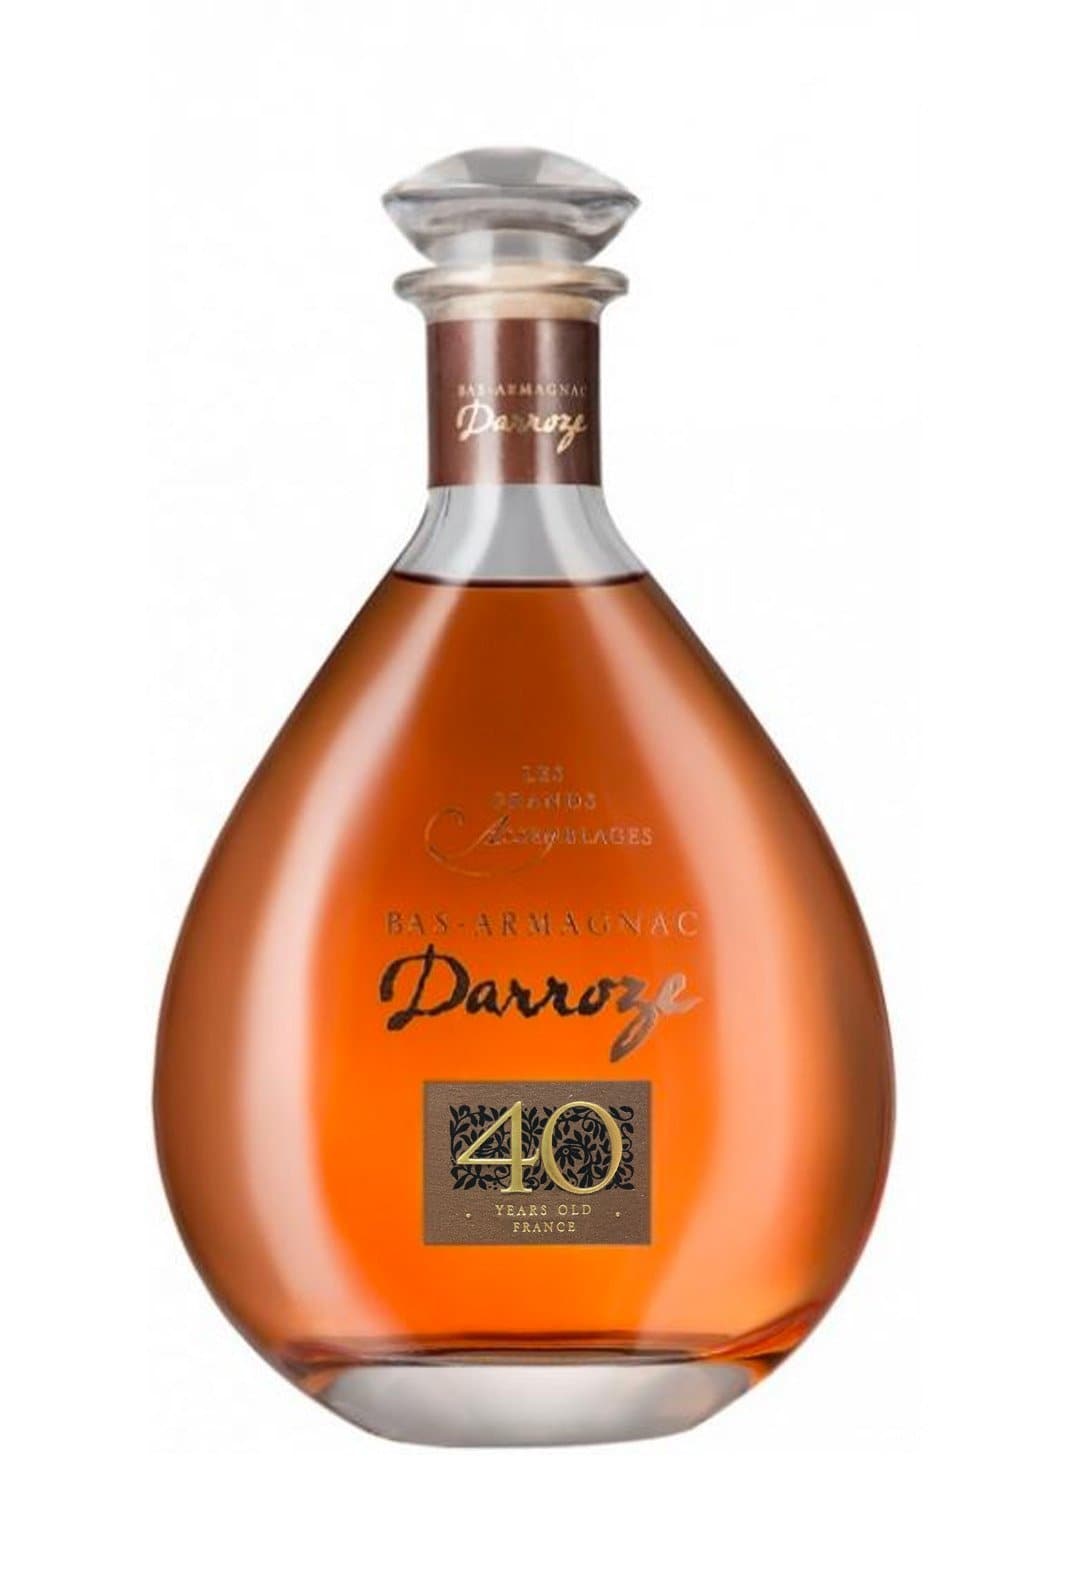 Darroze Grand Bas Armagnac Les Grands Assemblages 40 years Carafe 43% 700ml | Brandy | Shop online at Spirits of France